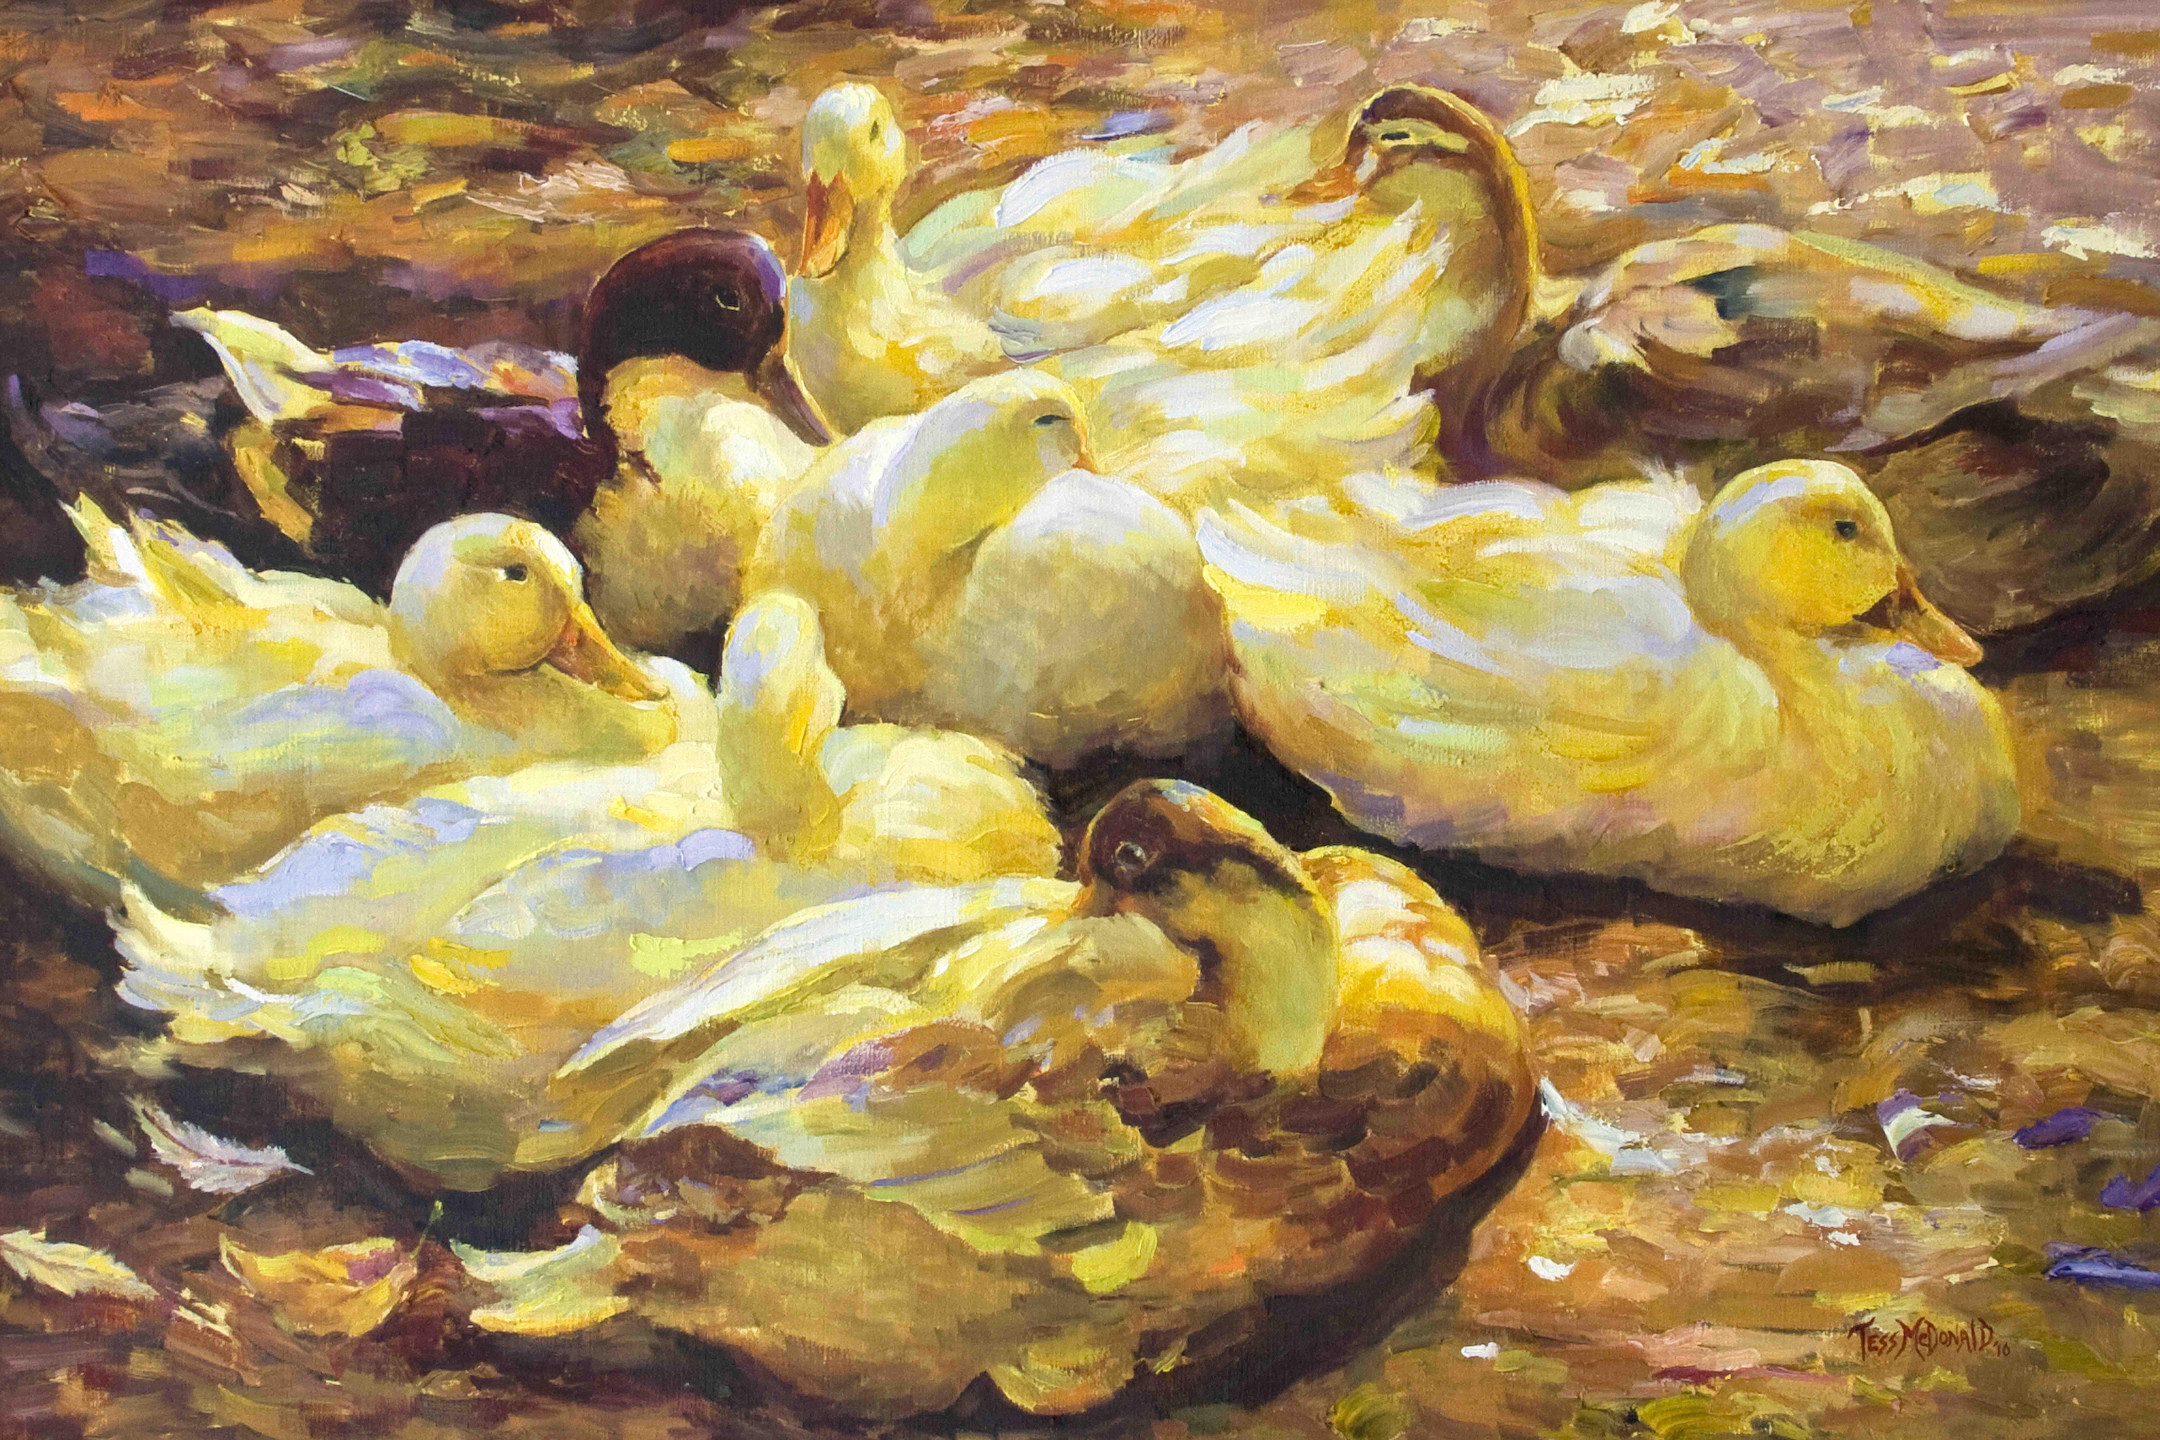 Painting of the ducks.